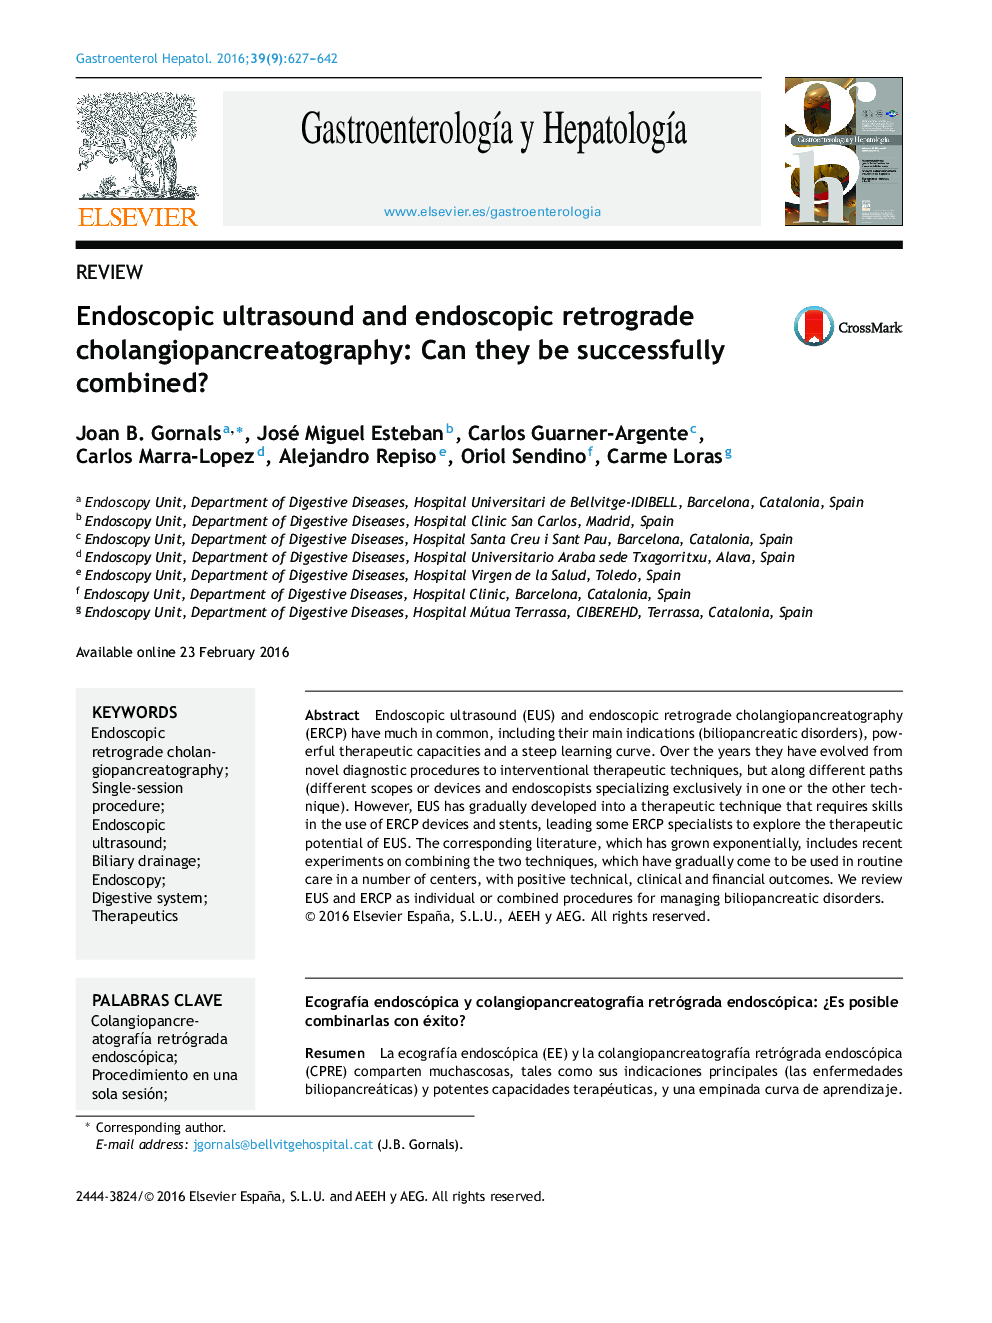 Endoscopic ultrasound and endoscopic retrograde cholangiopancreatography: Can they be successfully combined?